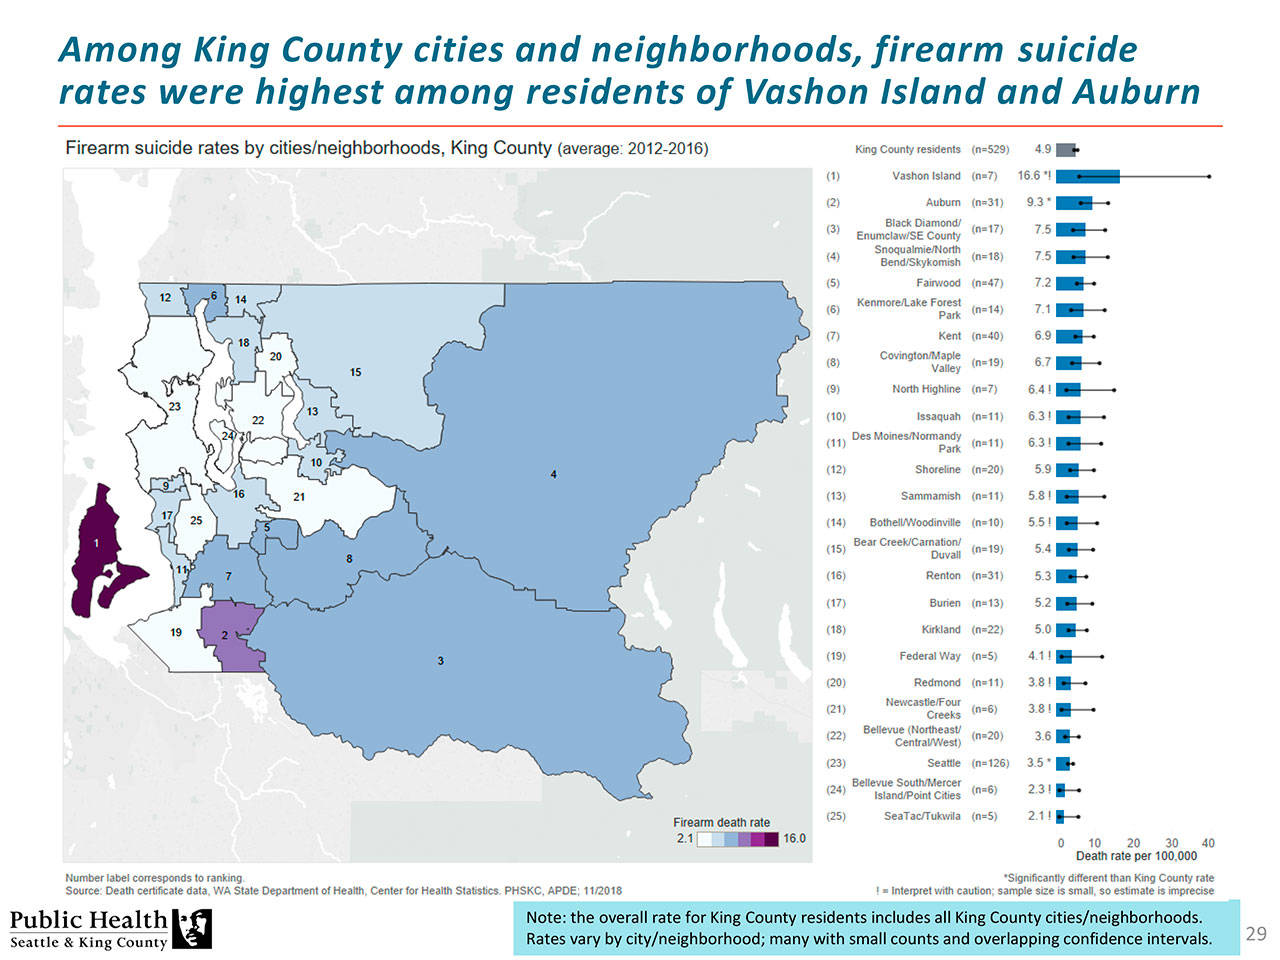 A page from the 2019 “Firearm Deaths Among Residents of King County and Seattle” report shows south King County communities have the most firearm homicides. Image courtesy Public Health